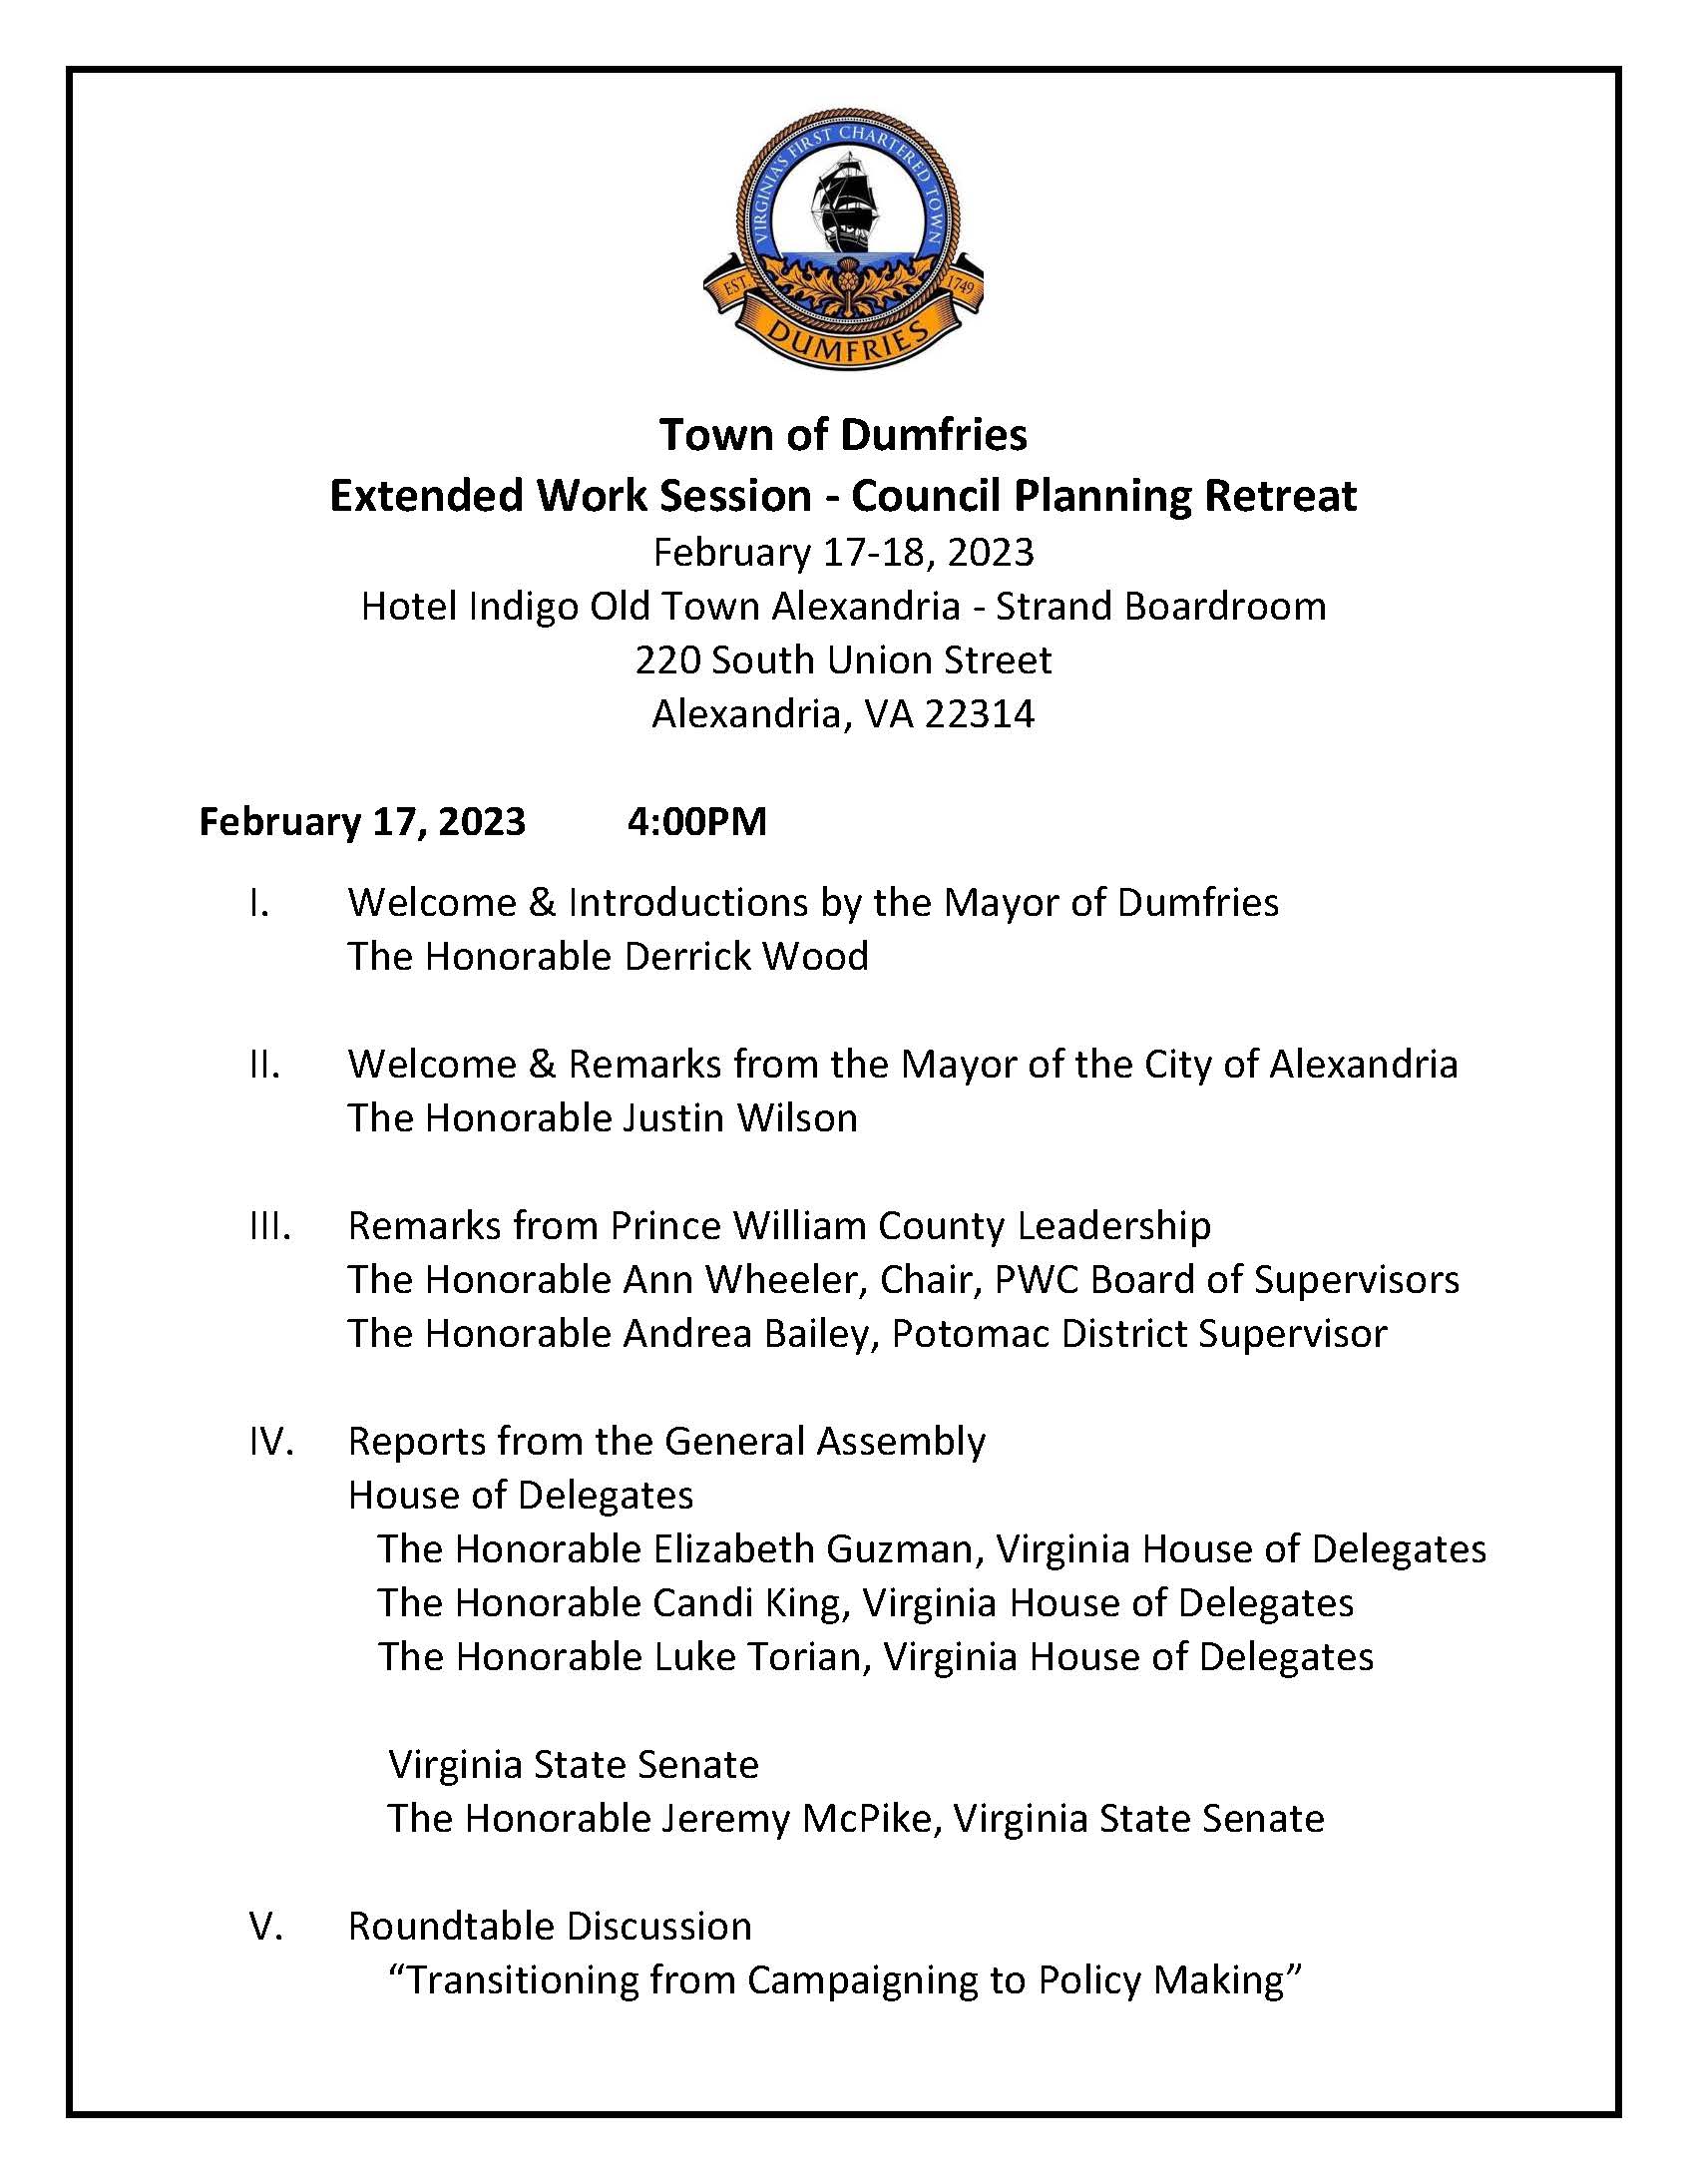 Town of Dumfries - Extended Worksession Agenda_Page_1